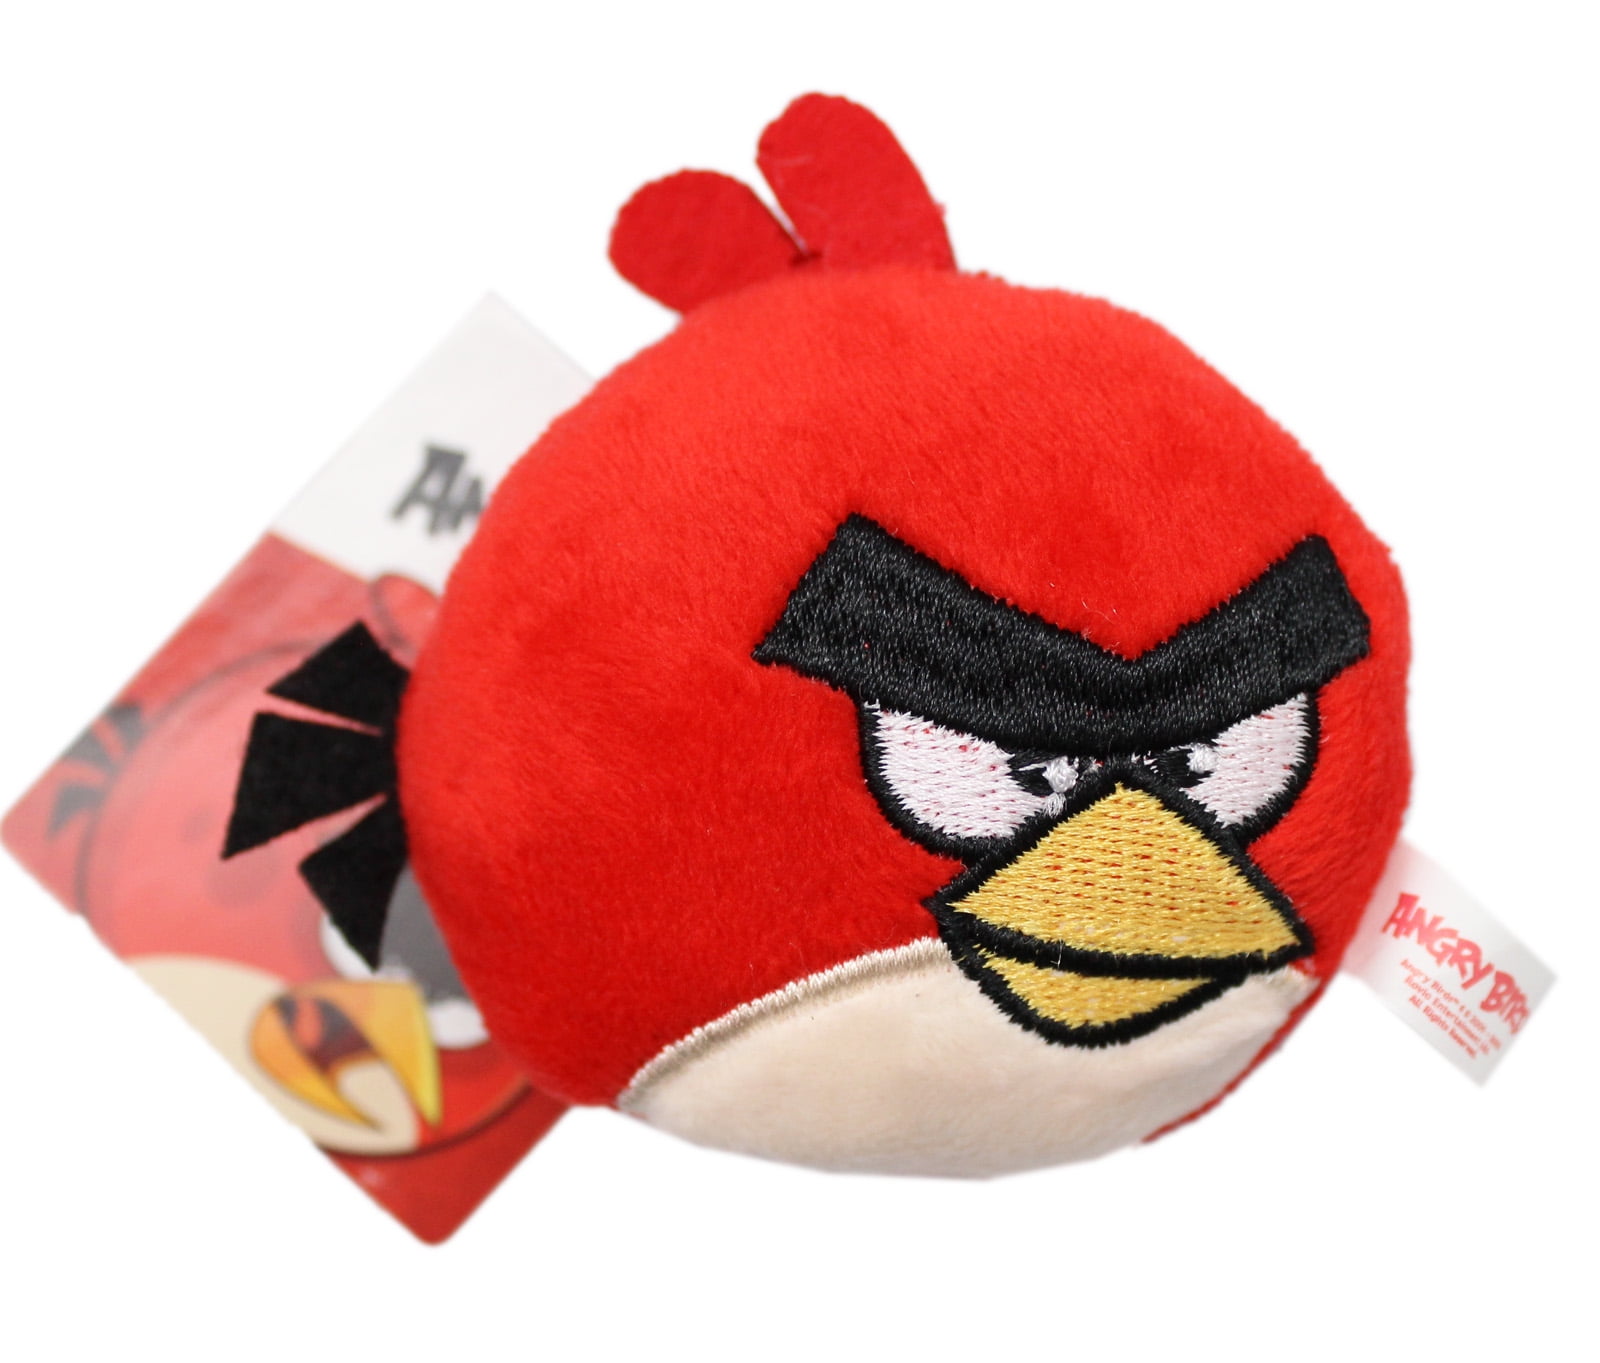 NEW Angry Birds Deluxe 8in Plush Toy Red Bird RED OFFICIALLY LICENSED 